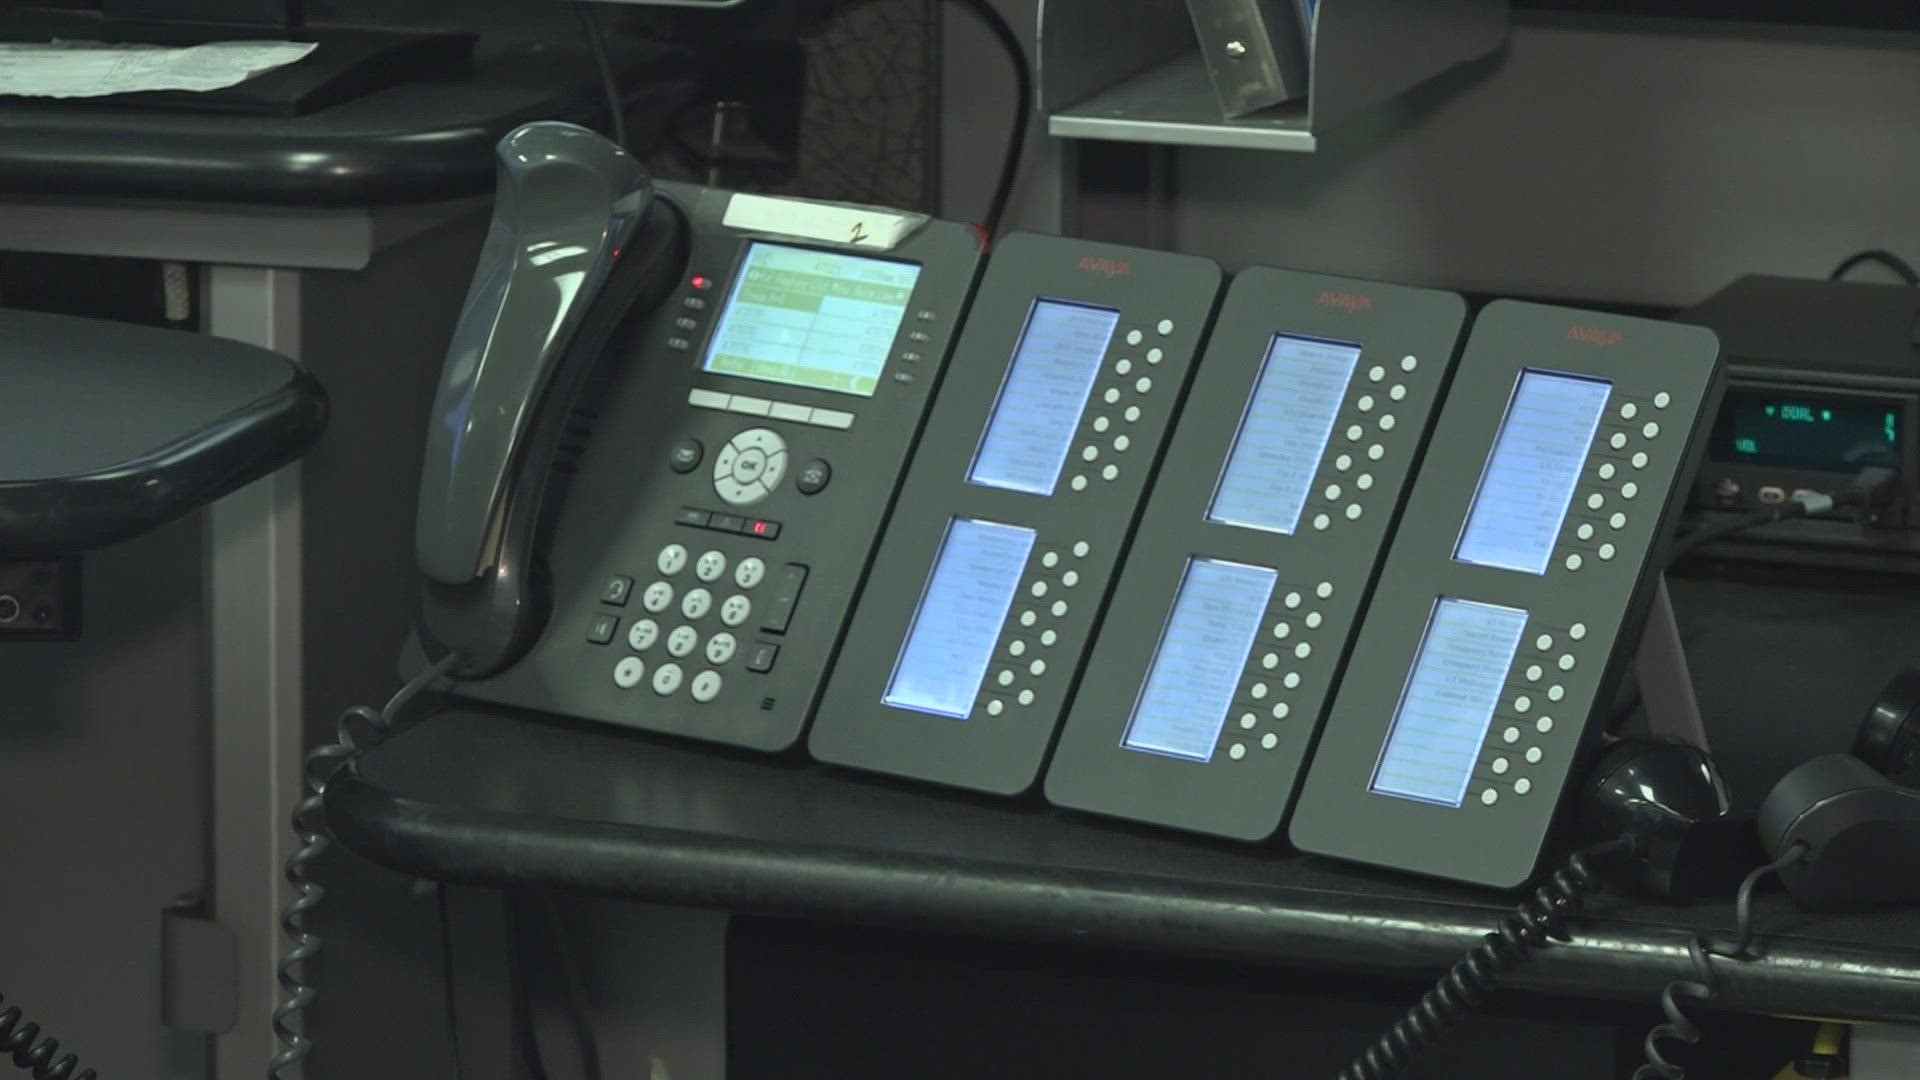 The Regional Communications Center in Augusta is short 10 people. The director said every 911 call will be answered, but said dispatchers are feeling burned out.